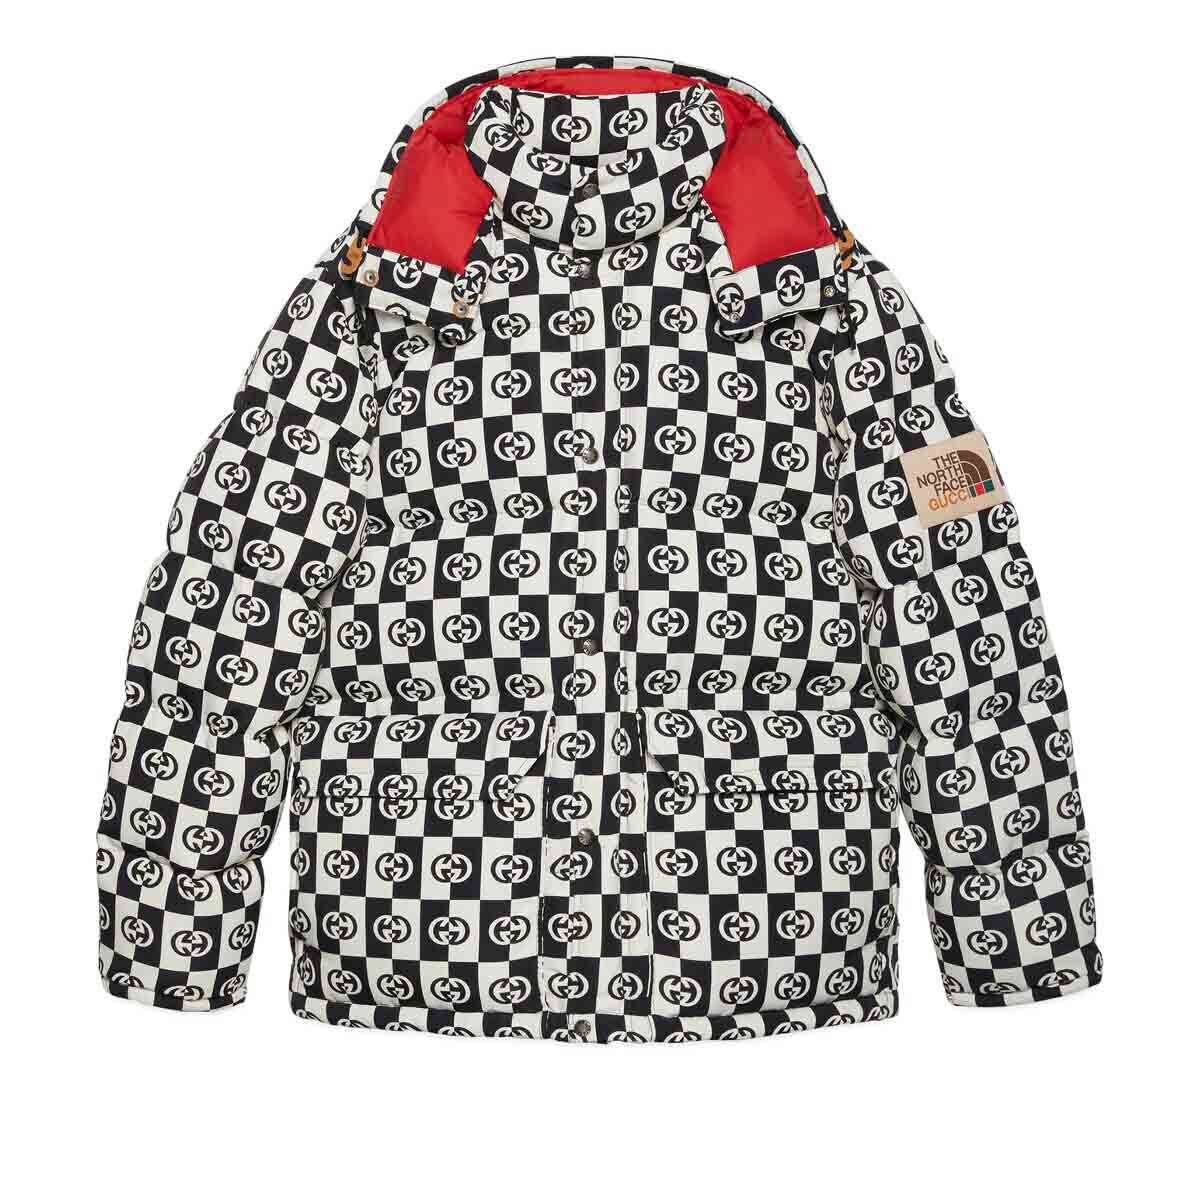 Gucci x The North Face Down Jacket Ivory/Black Checkered Men's